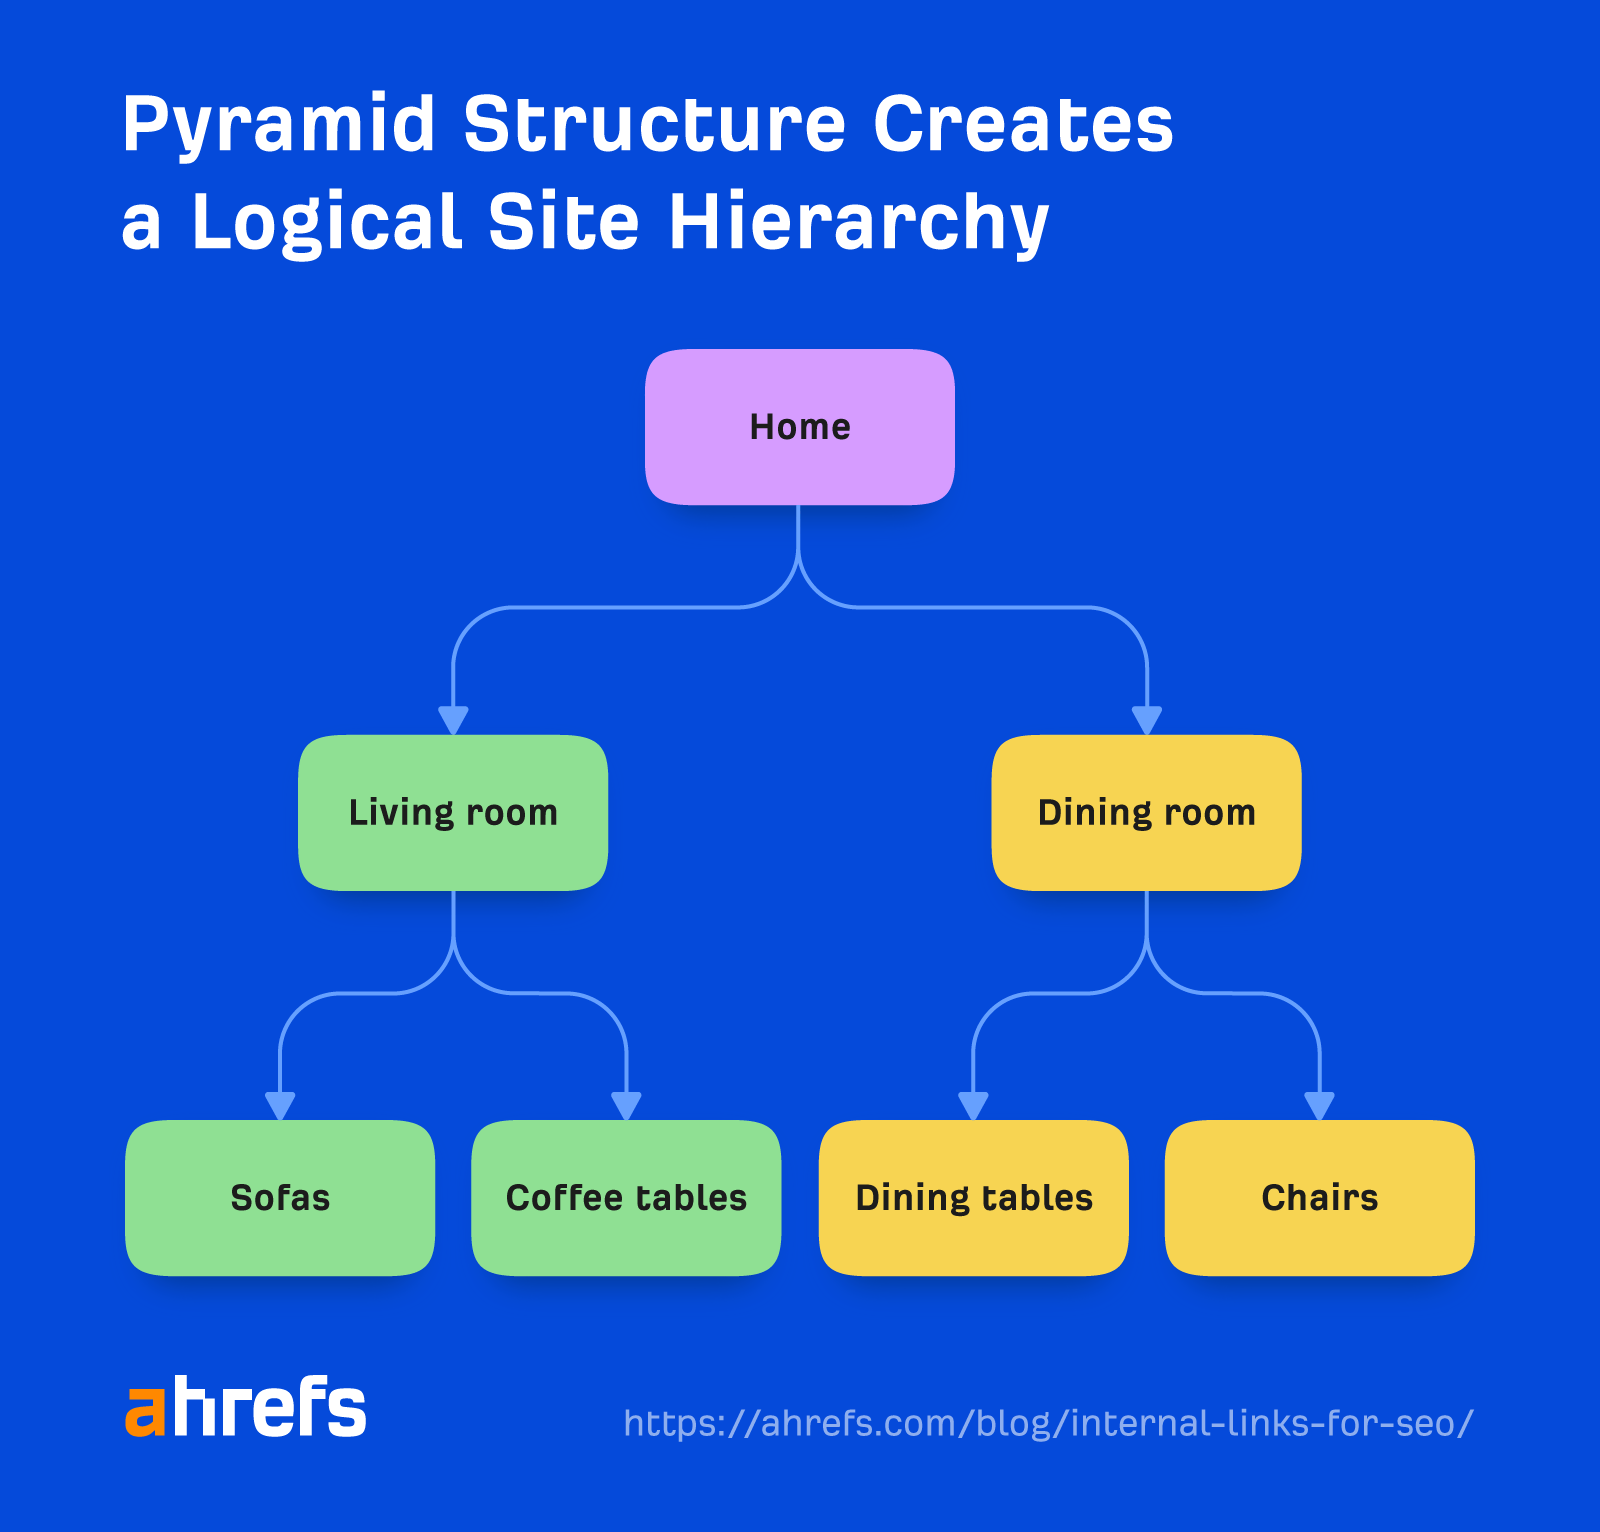 Flowchart showing how a pyramid structure creates a logical site hierarchy